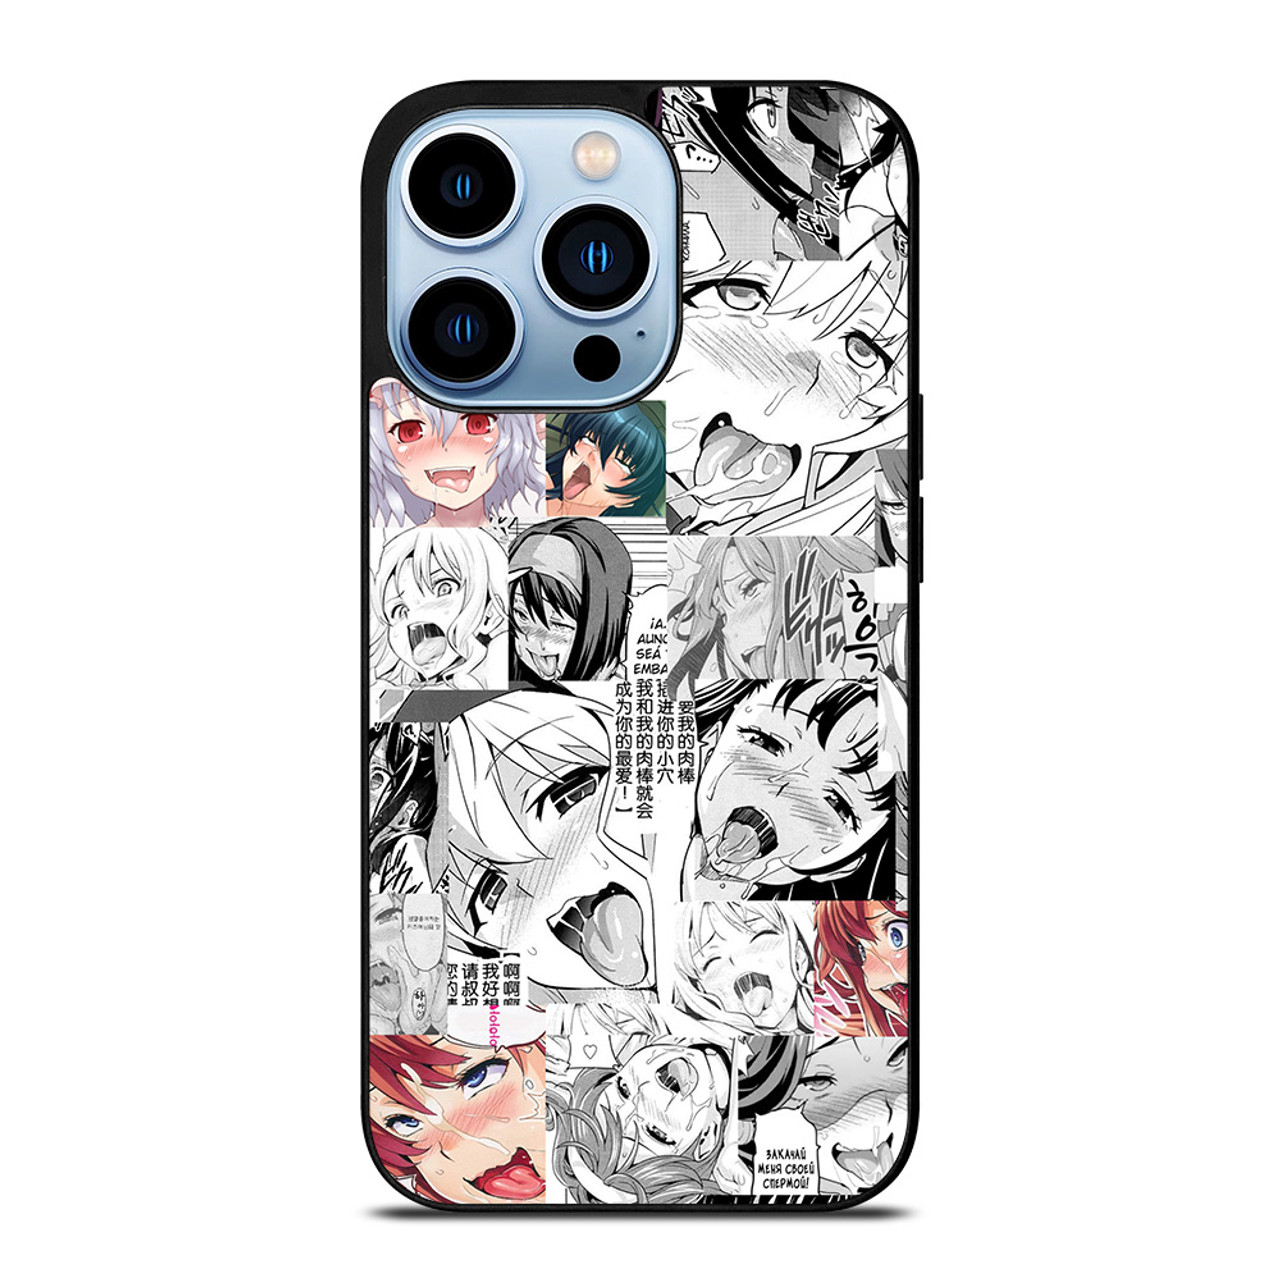 For iPhone 1313 Pro13 Pro Max Hybrid Cover Case Comic Cartoon Anime Wave   eBay